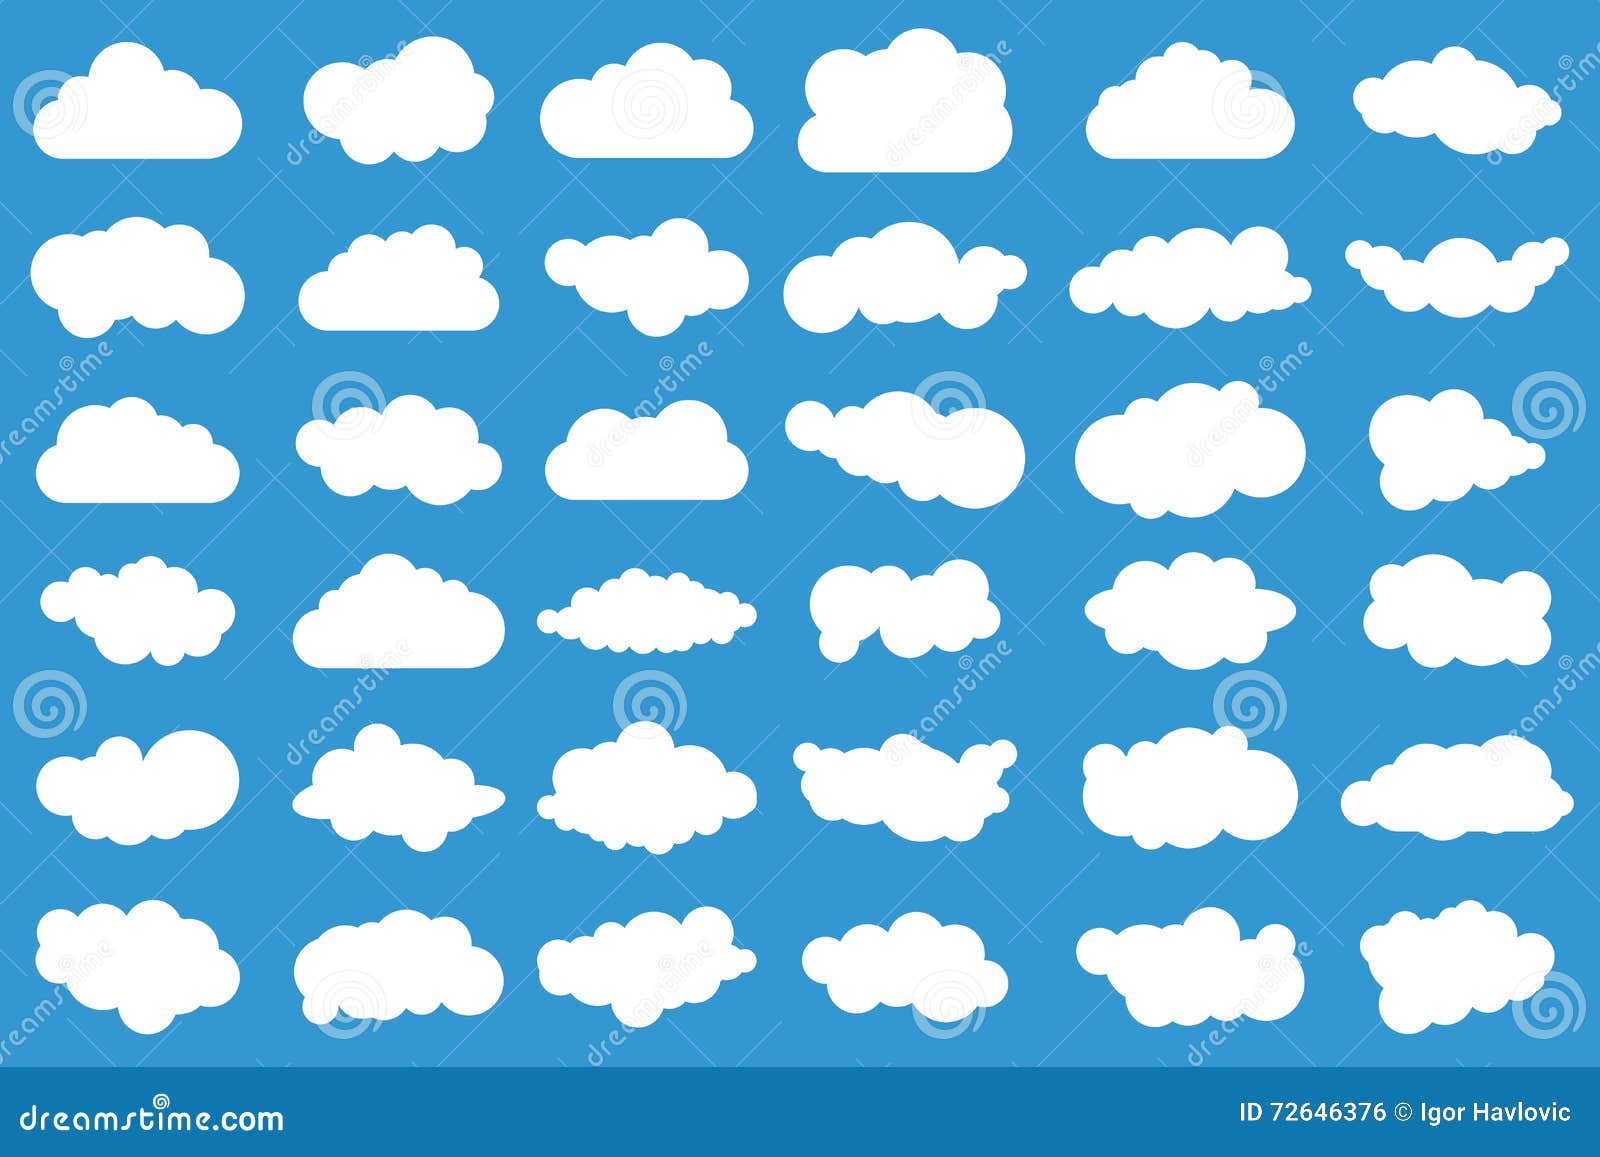 cloud icons on blue background. 36 different clouds. cloudscape. clouds.